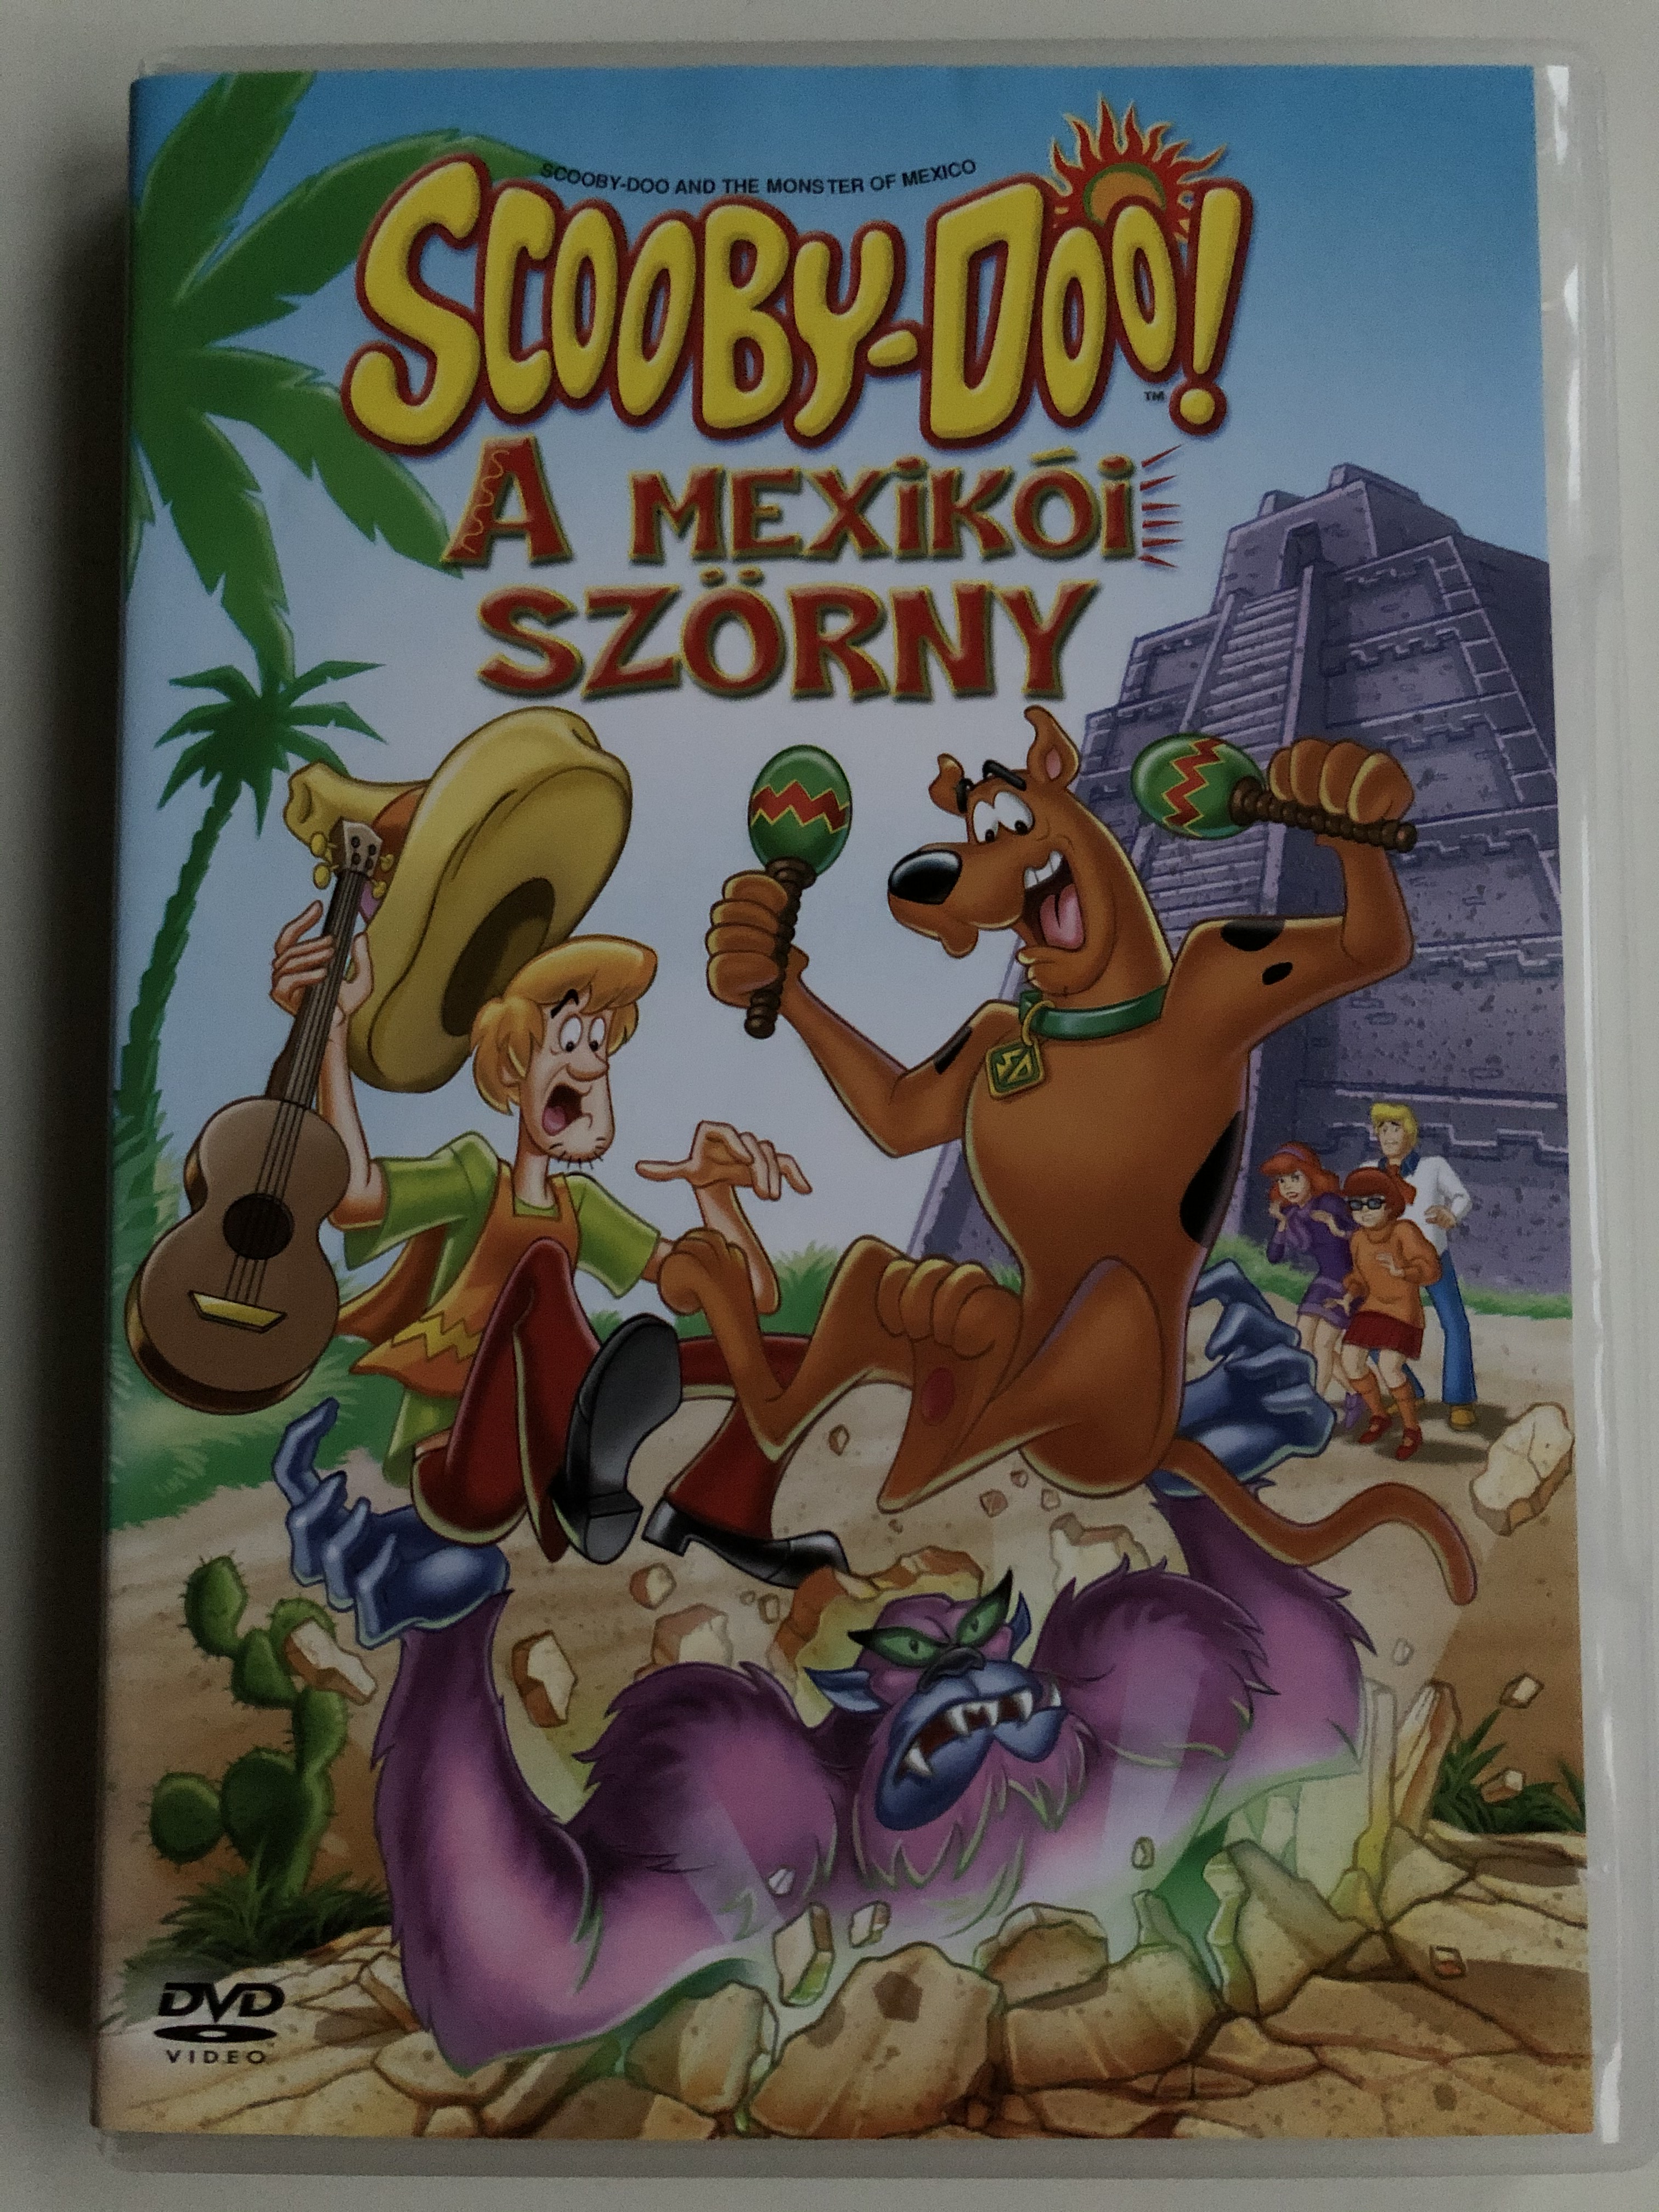 scooby-doo-and-the-monster-of-mexico-dvd-2003-scooby-doo-s-a-mexik-i-sz-rny-1.jpg